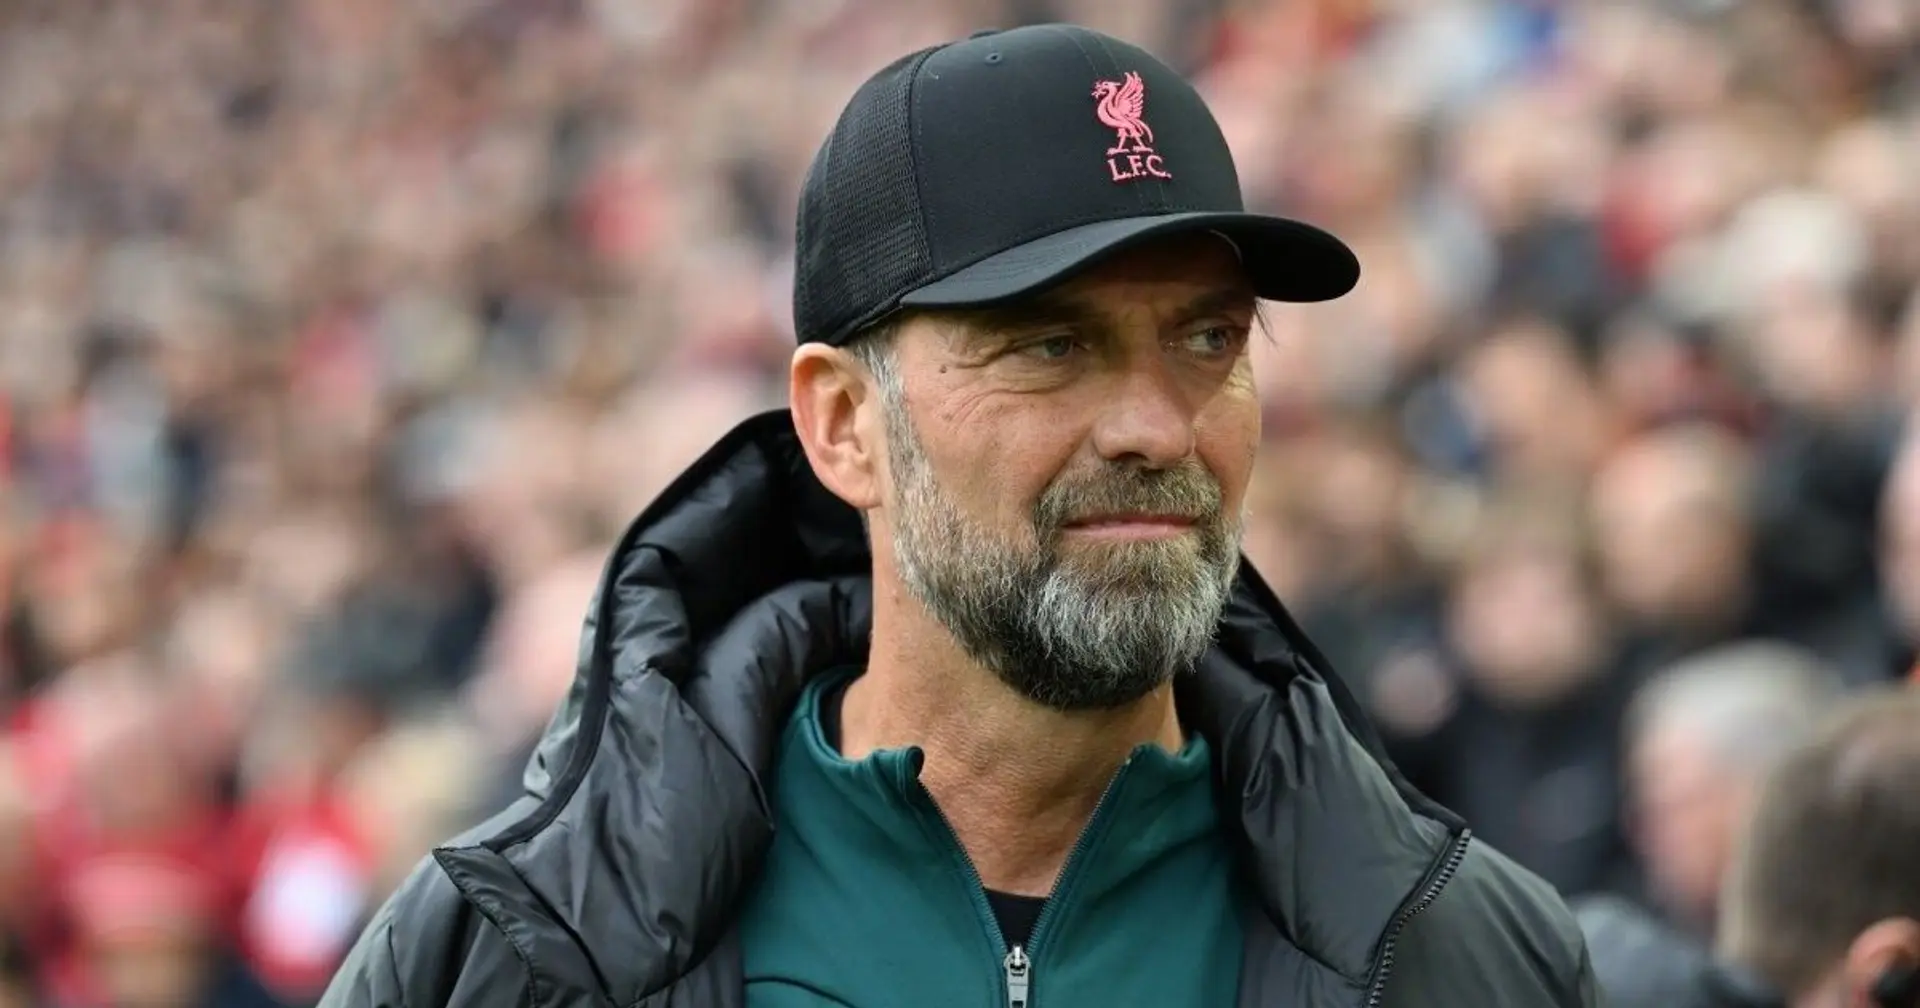 Klopp becoming more 'hands-on' with recruitment at Liverpool - multiple sources